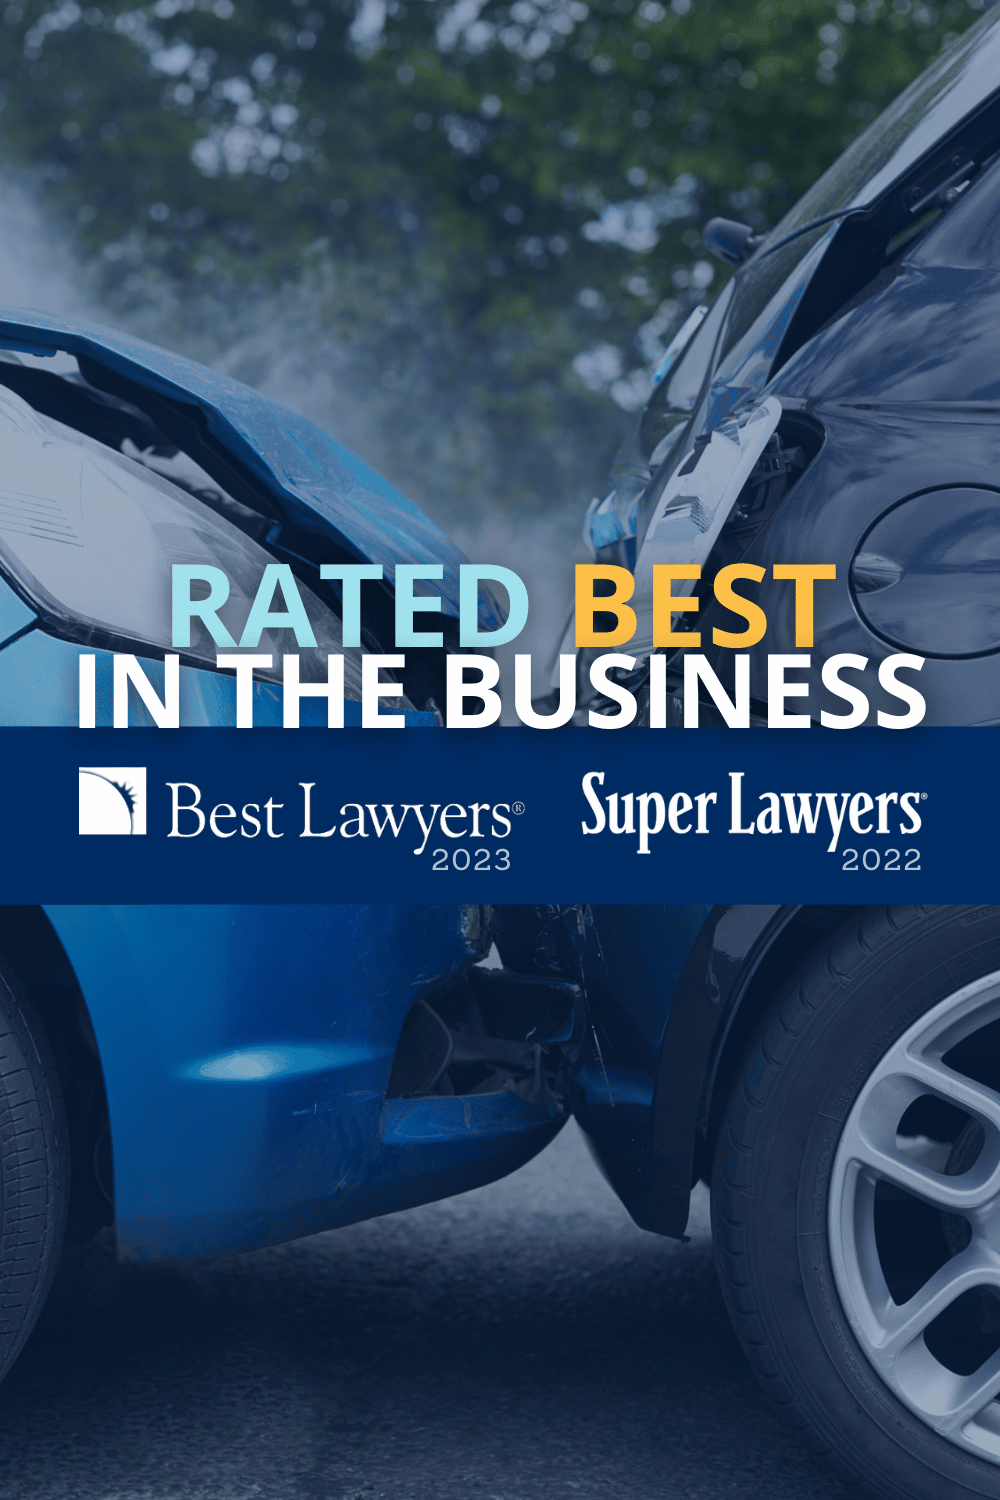 Michigan Auto Law attorneys voted Super Lawyers 2022 and Best Lawyers in America 2023